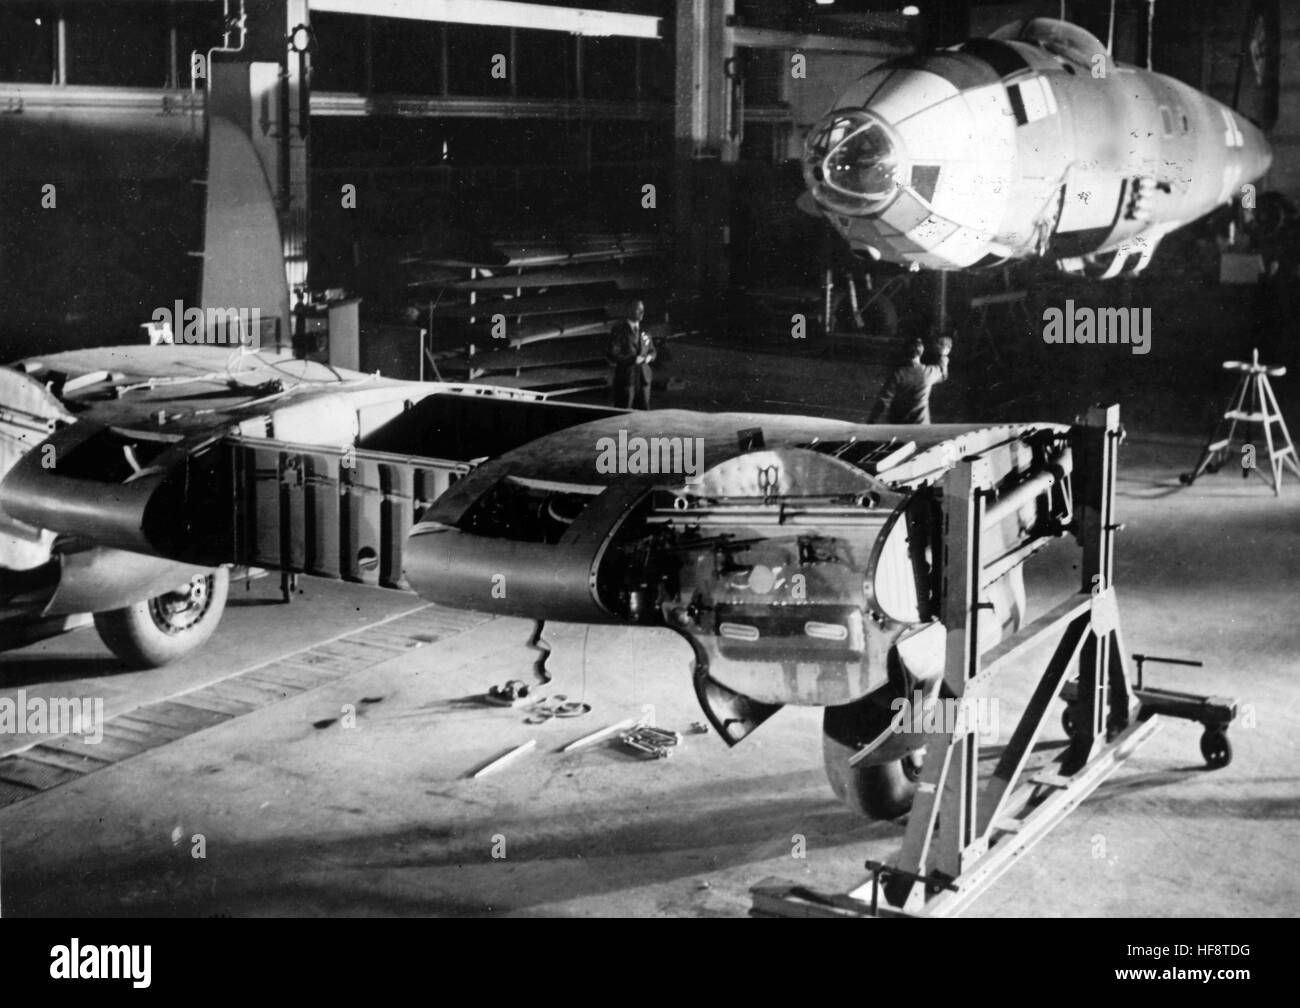 The Nazi propaganda image shows the production process of Heinkel He 111 combat planes in an assembly hall at the Ernst Heinkel Airplane Manufacturers. Published in May 1942.  [Further images from this photo series can be found under the title, "Der Mann und sein Werk" (The Man and his Works - referring to Ernst Heinkel, airplane manufacturer).] Fotoarchiv für Zeitgeschichte - NO  WIRELESS SERVICE - | usage worldwide Stock Photo